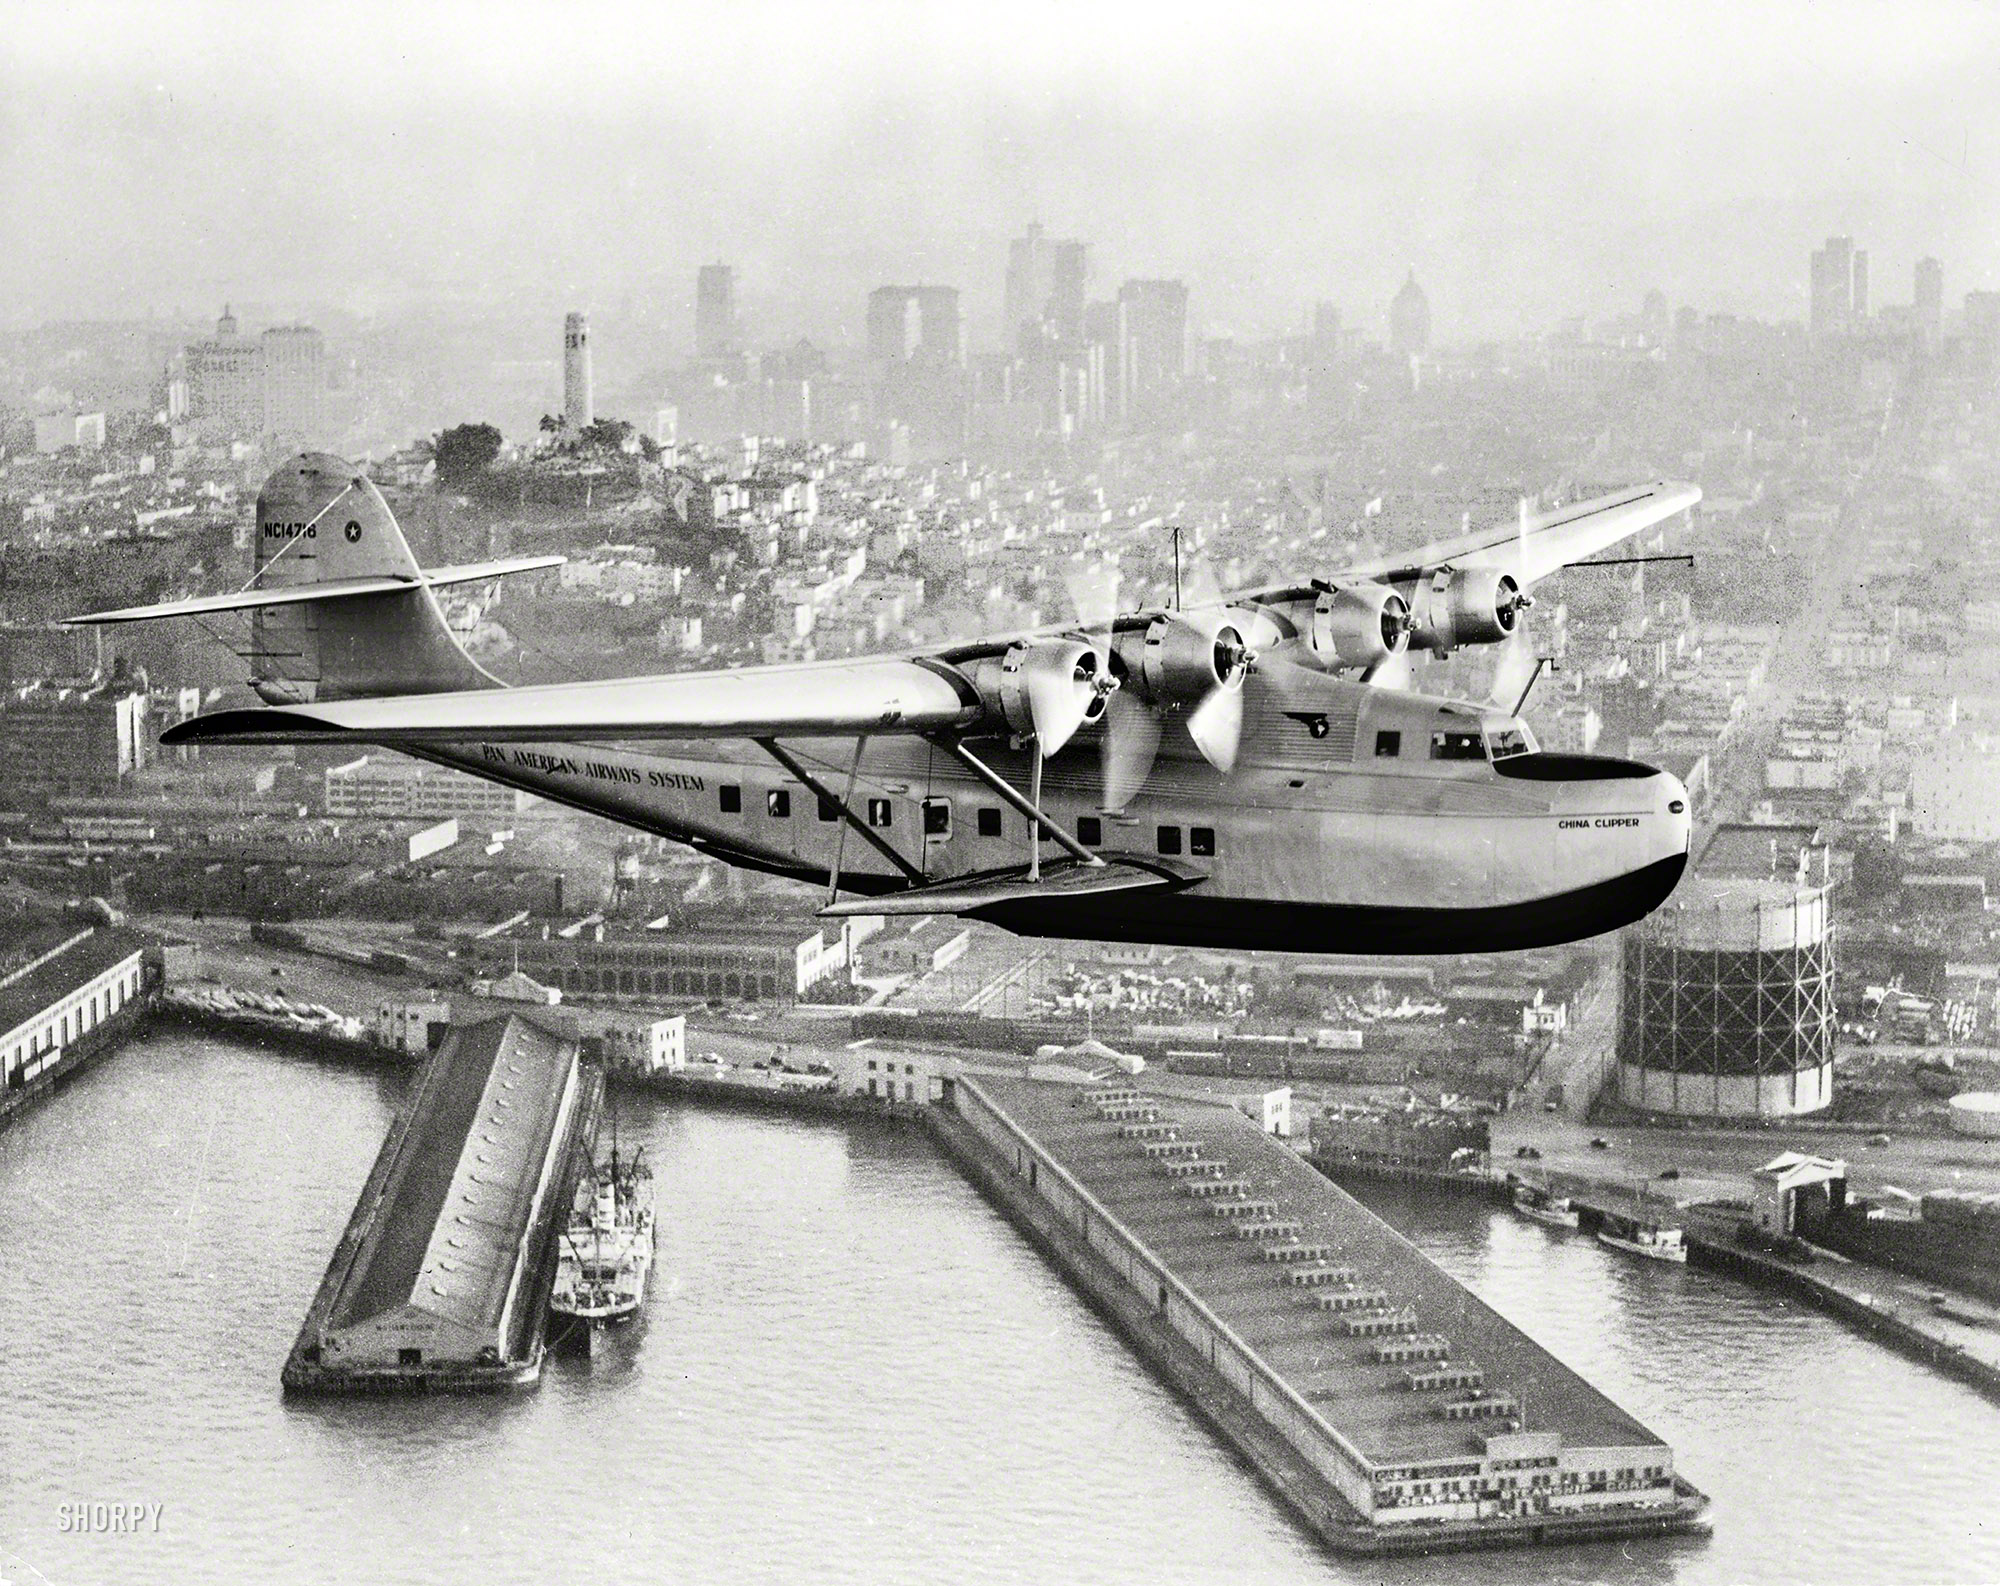 July 22, 1936. "Aerial view of Pan American Airways 'China Clipper' (Martin M130 Flying Boat) over San Francisco with Coit Memorial Tower at left. Clyde H. Sunderland, commercial and aerial photographs, Oakland, Calif." View full size.